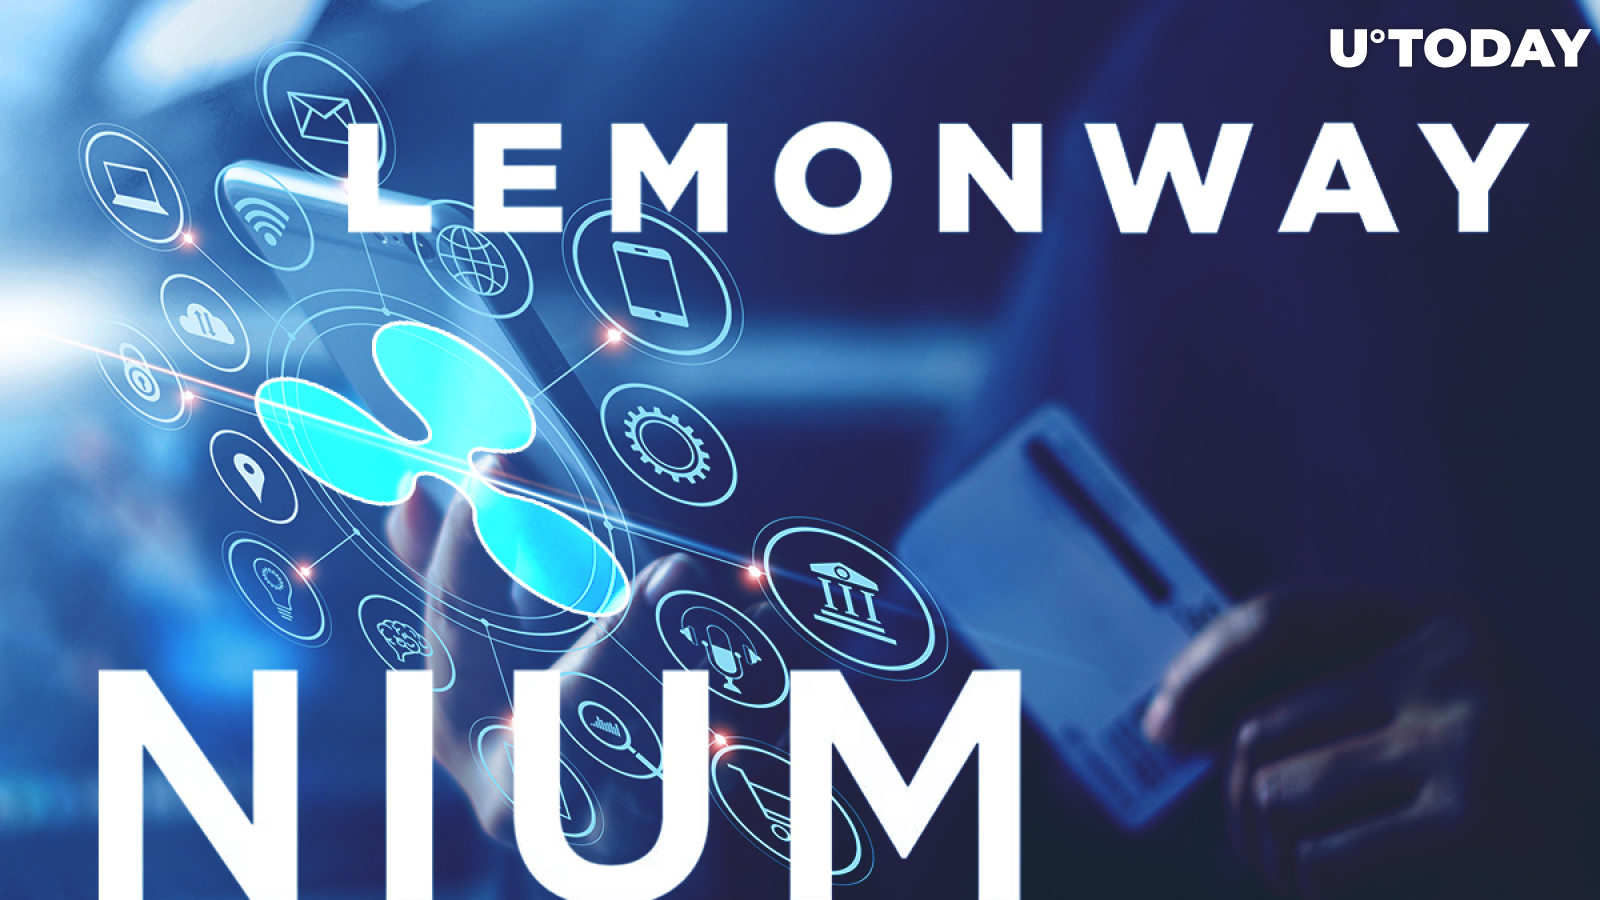 Ripple Connects Lemonway to Nium to Improve Its EUR-to-EUR Payment Corridors